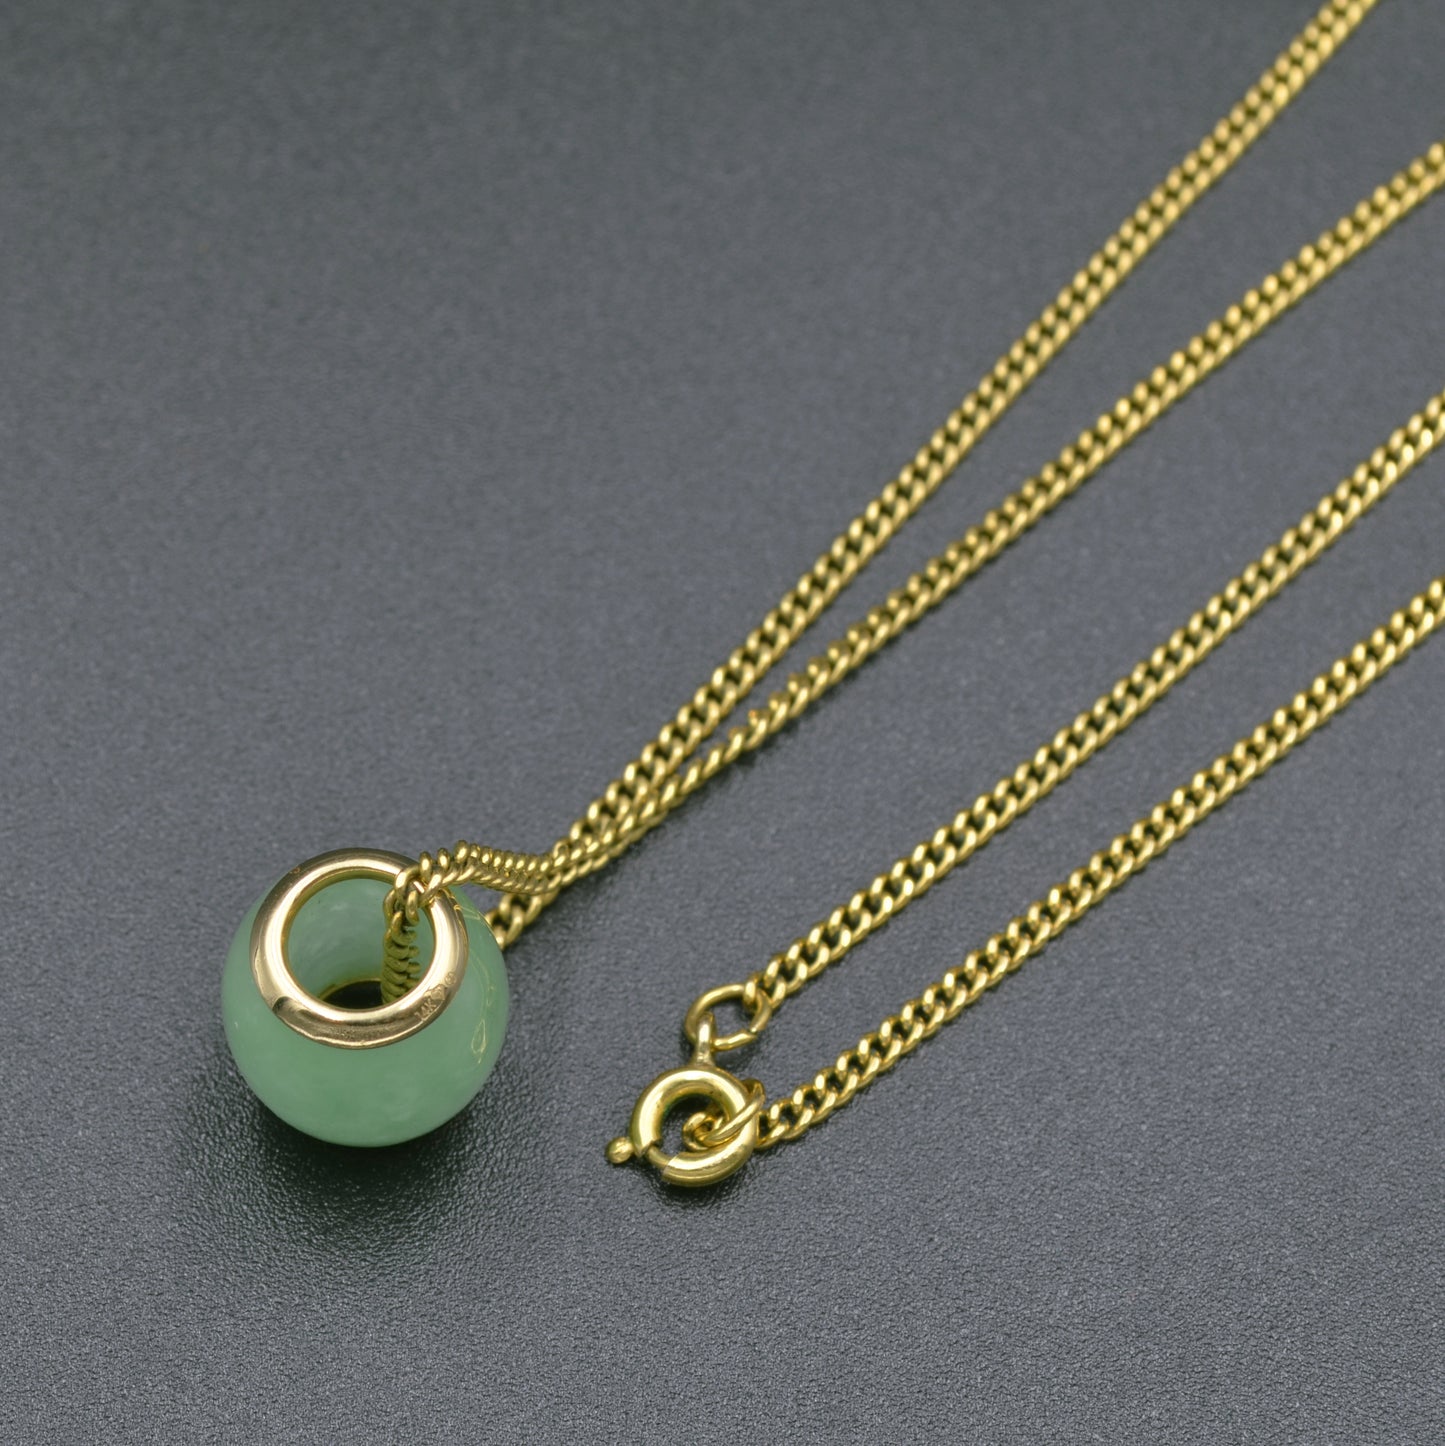 Jade and Gold Pendant Necklace